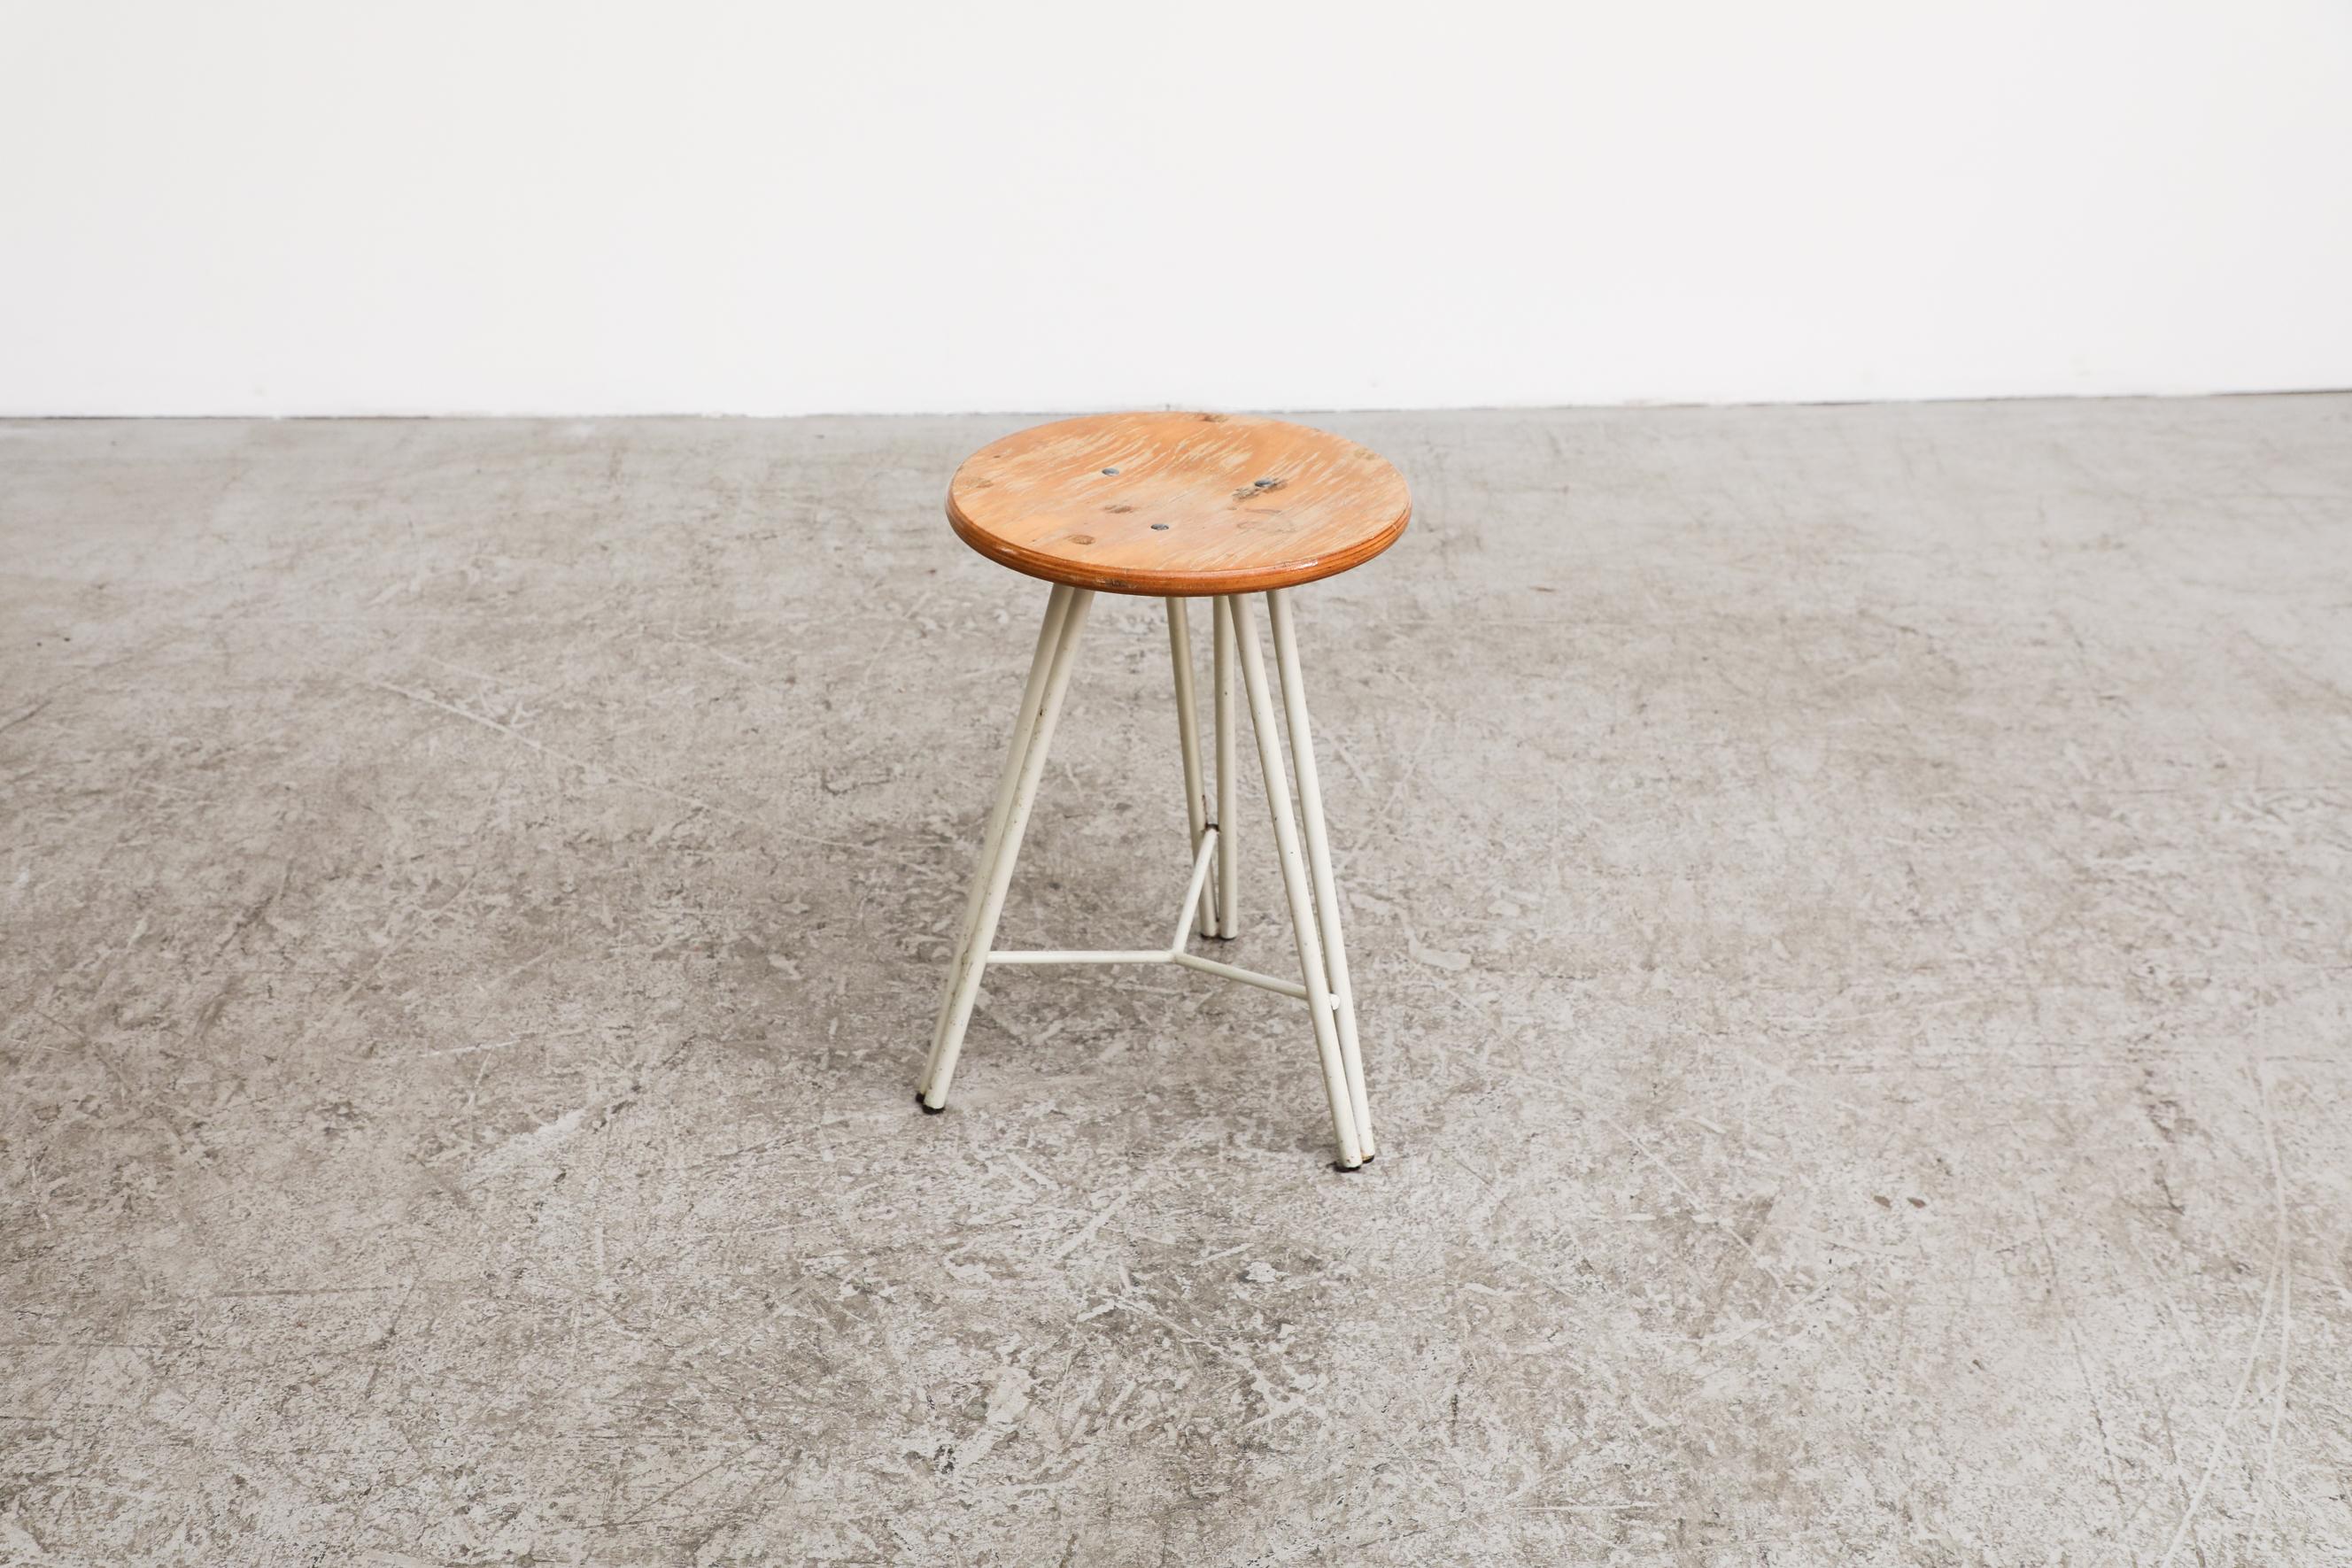 Vintage Pilastro Style Dutch Tripod Task Stool with White Legs and Wood Seat In Good Condition For Sale In Los Angeles, CA